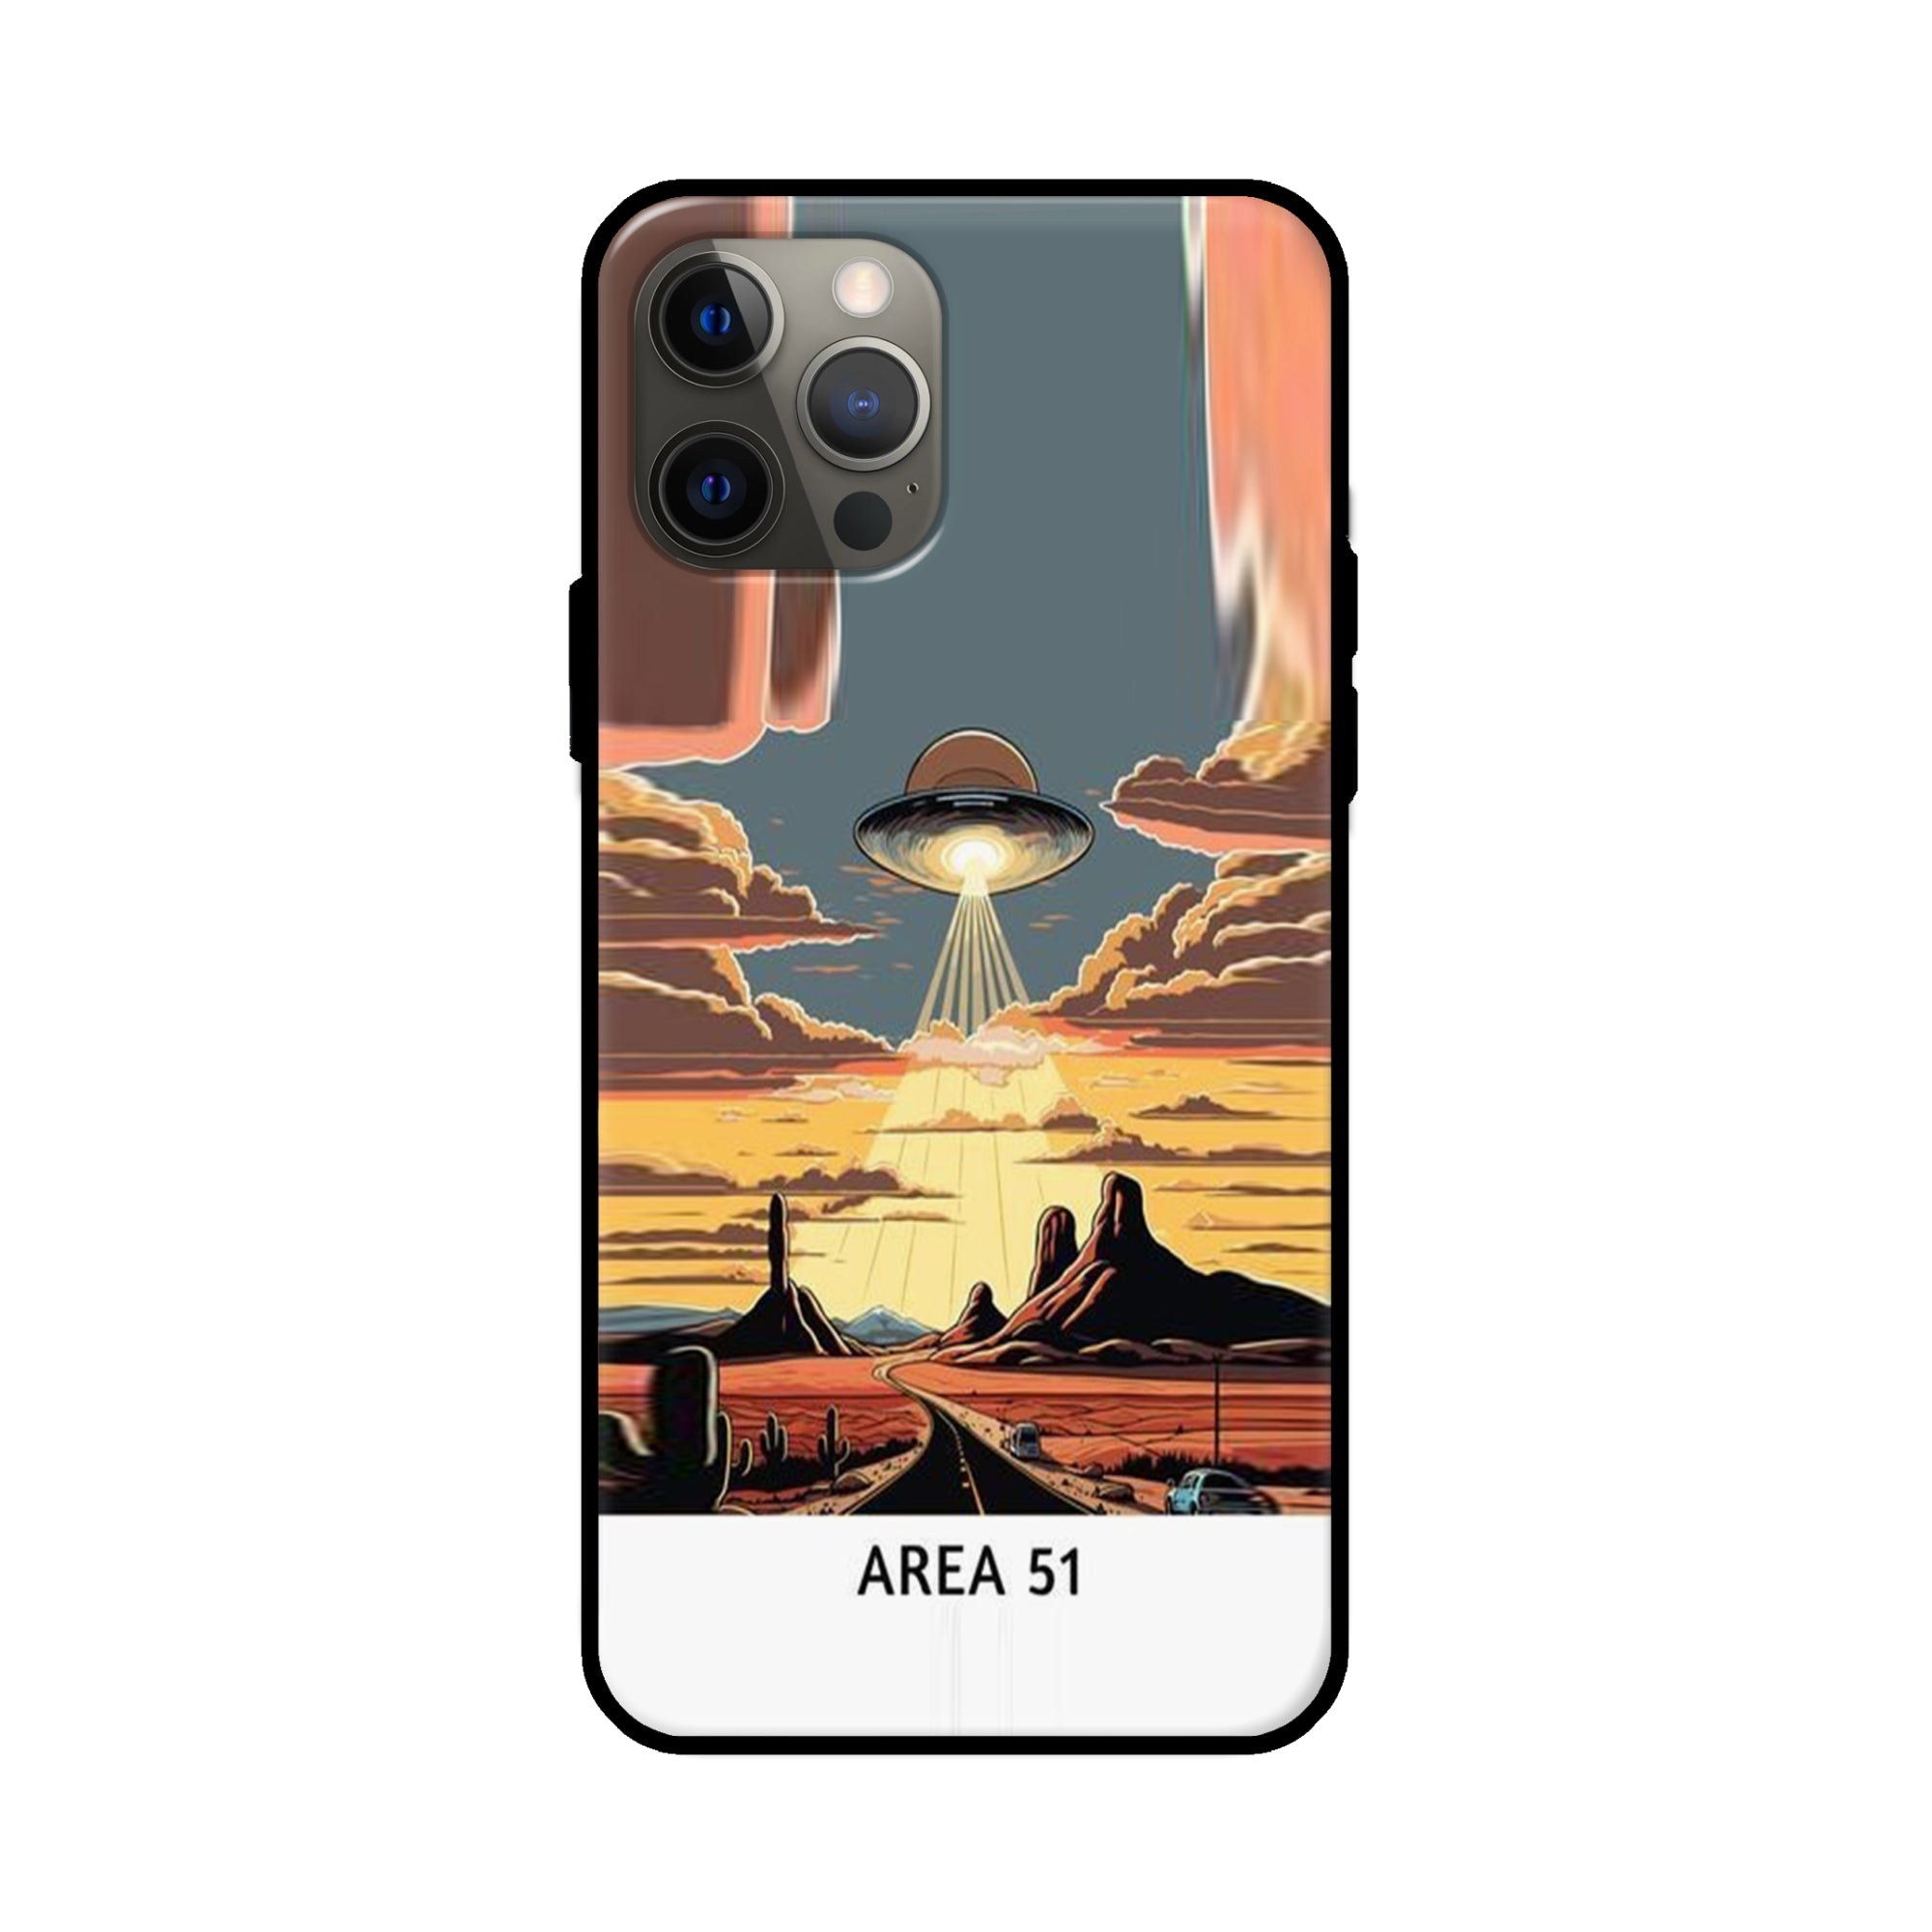 Buy Area 51 Glass/Metal Back Mobile Phone Case/Cover For Apple iPhone 12 pro max Online